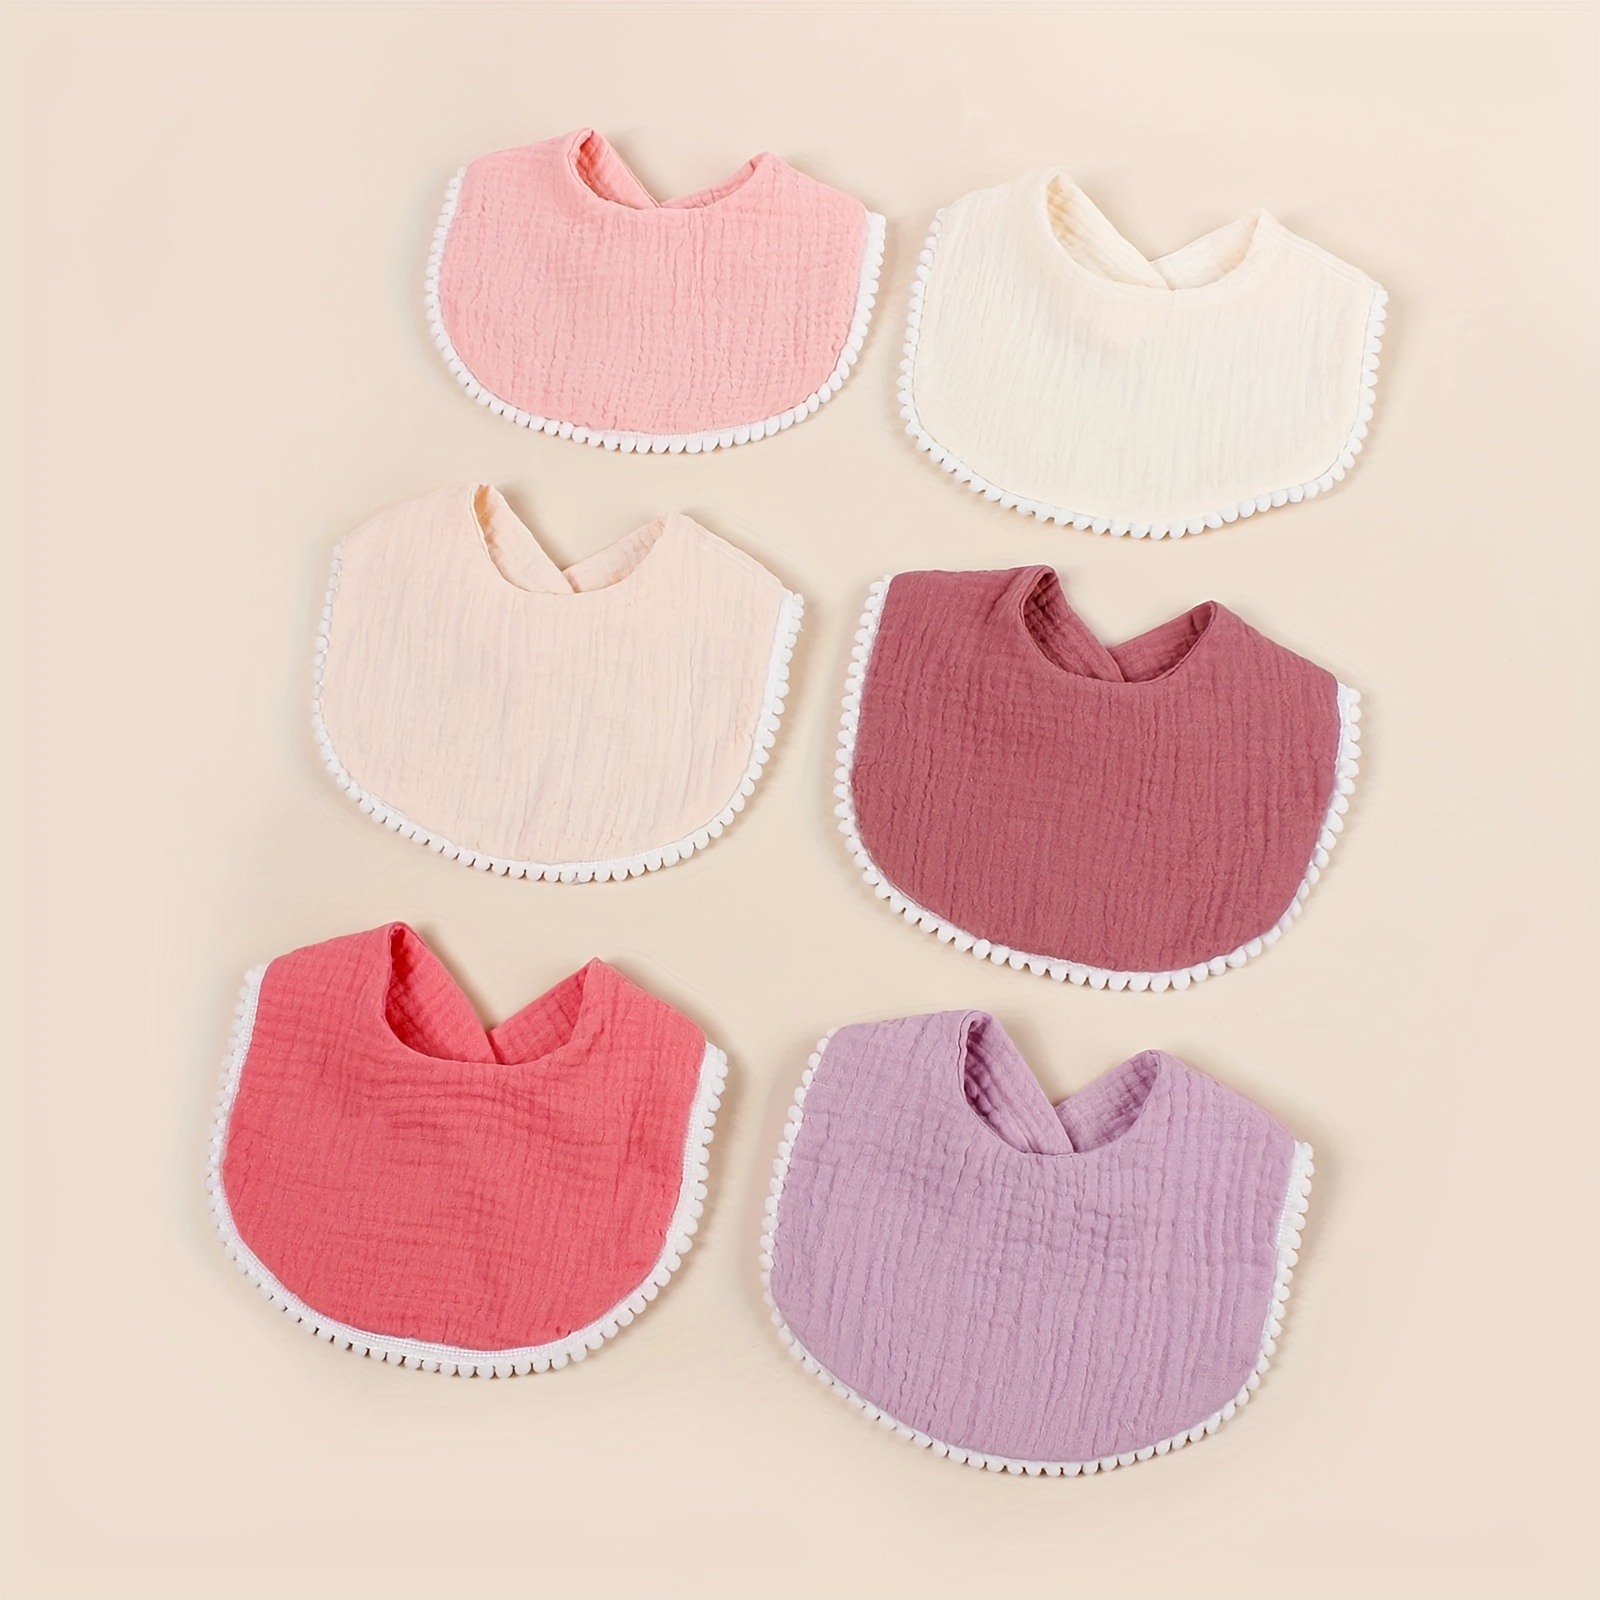 

6-piece Soft Cotton Baby Bibs With Cute Pom Poms - Solid Colors, Snap Closure, Perfect For Teething & Feeding, 0-3 Years